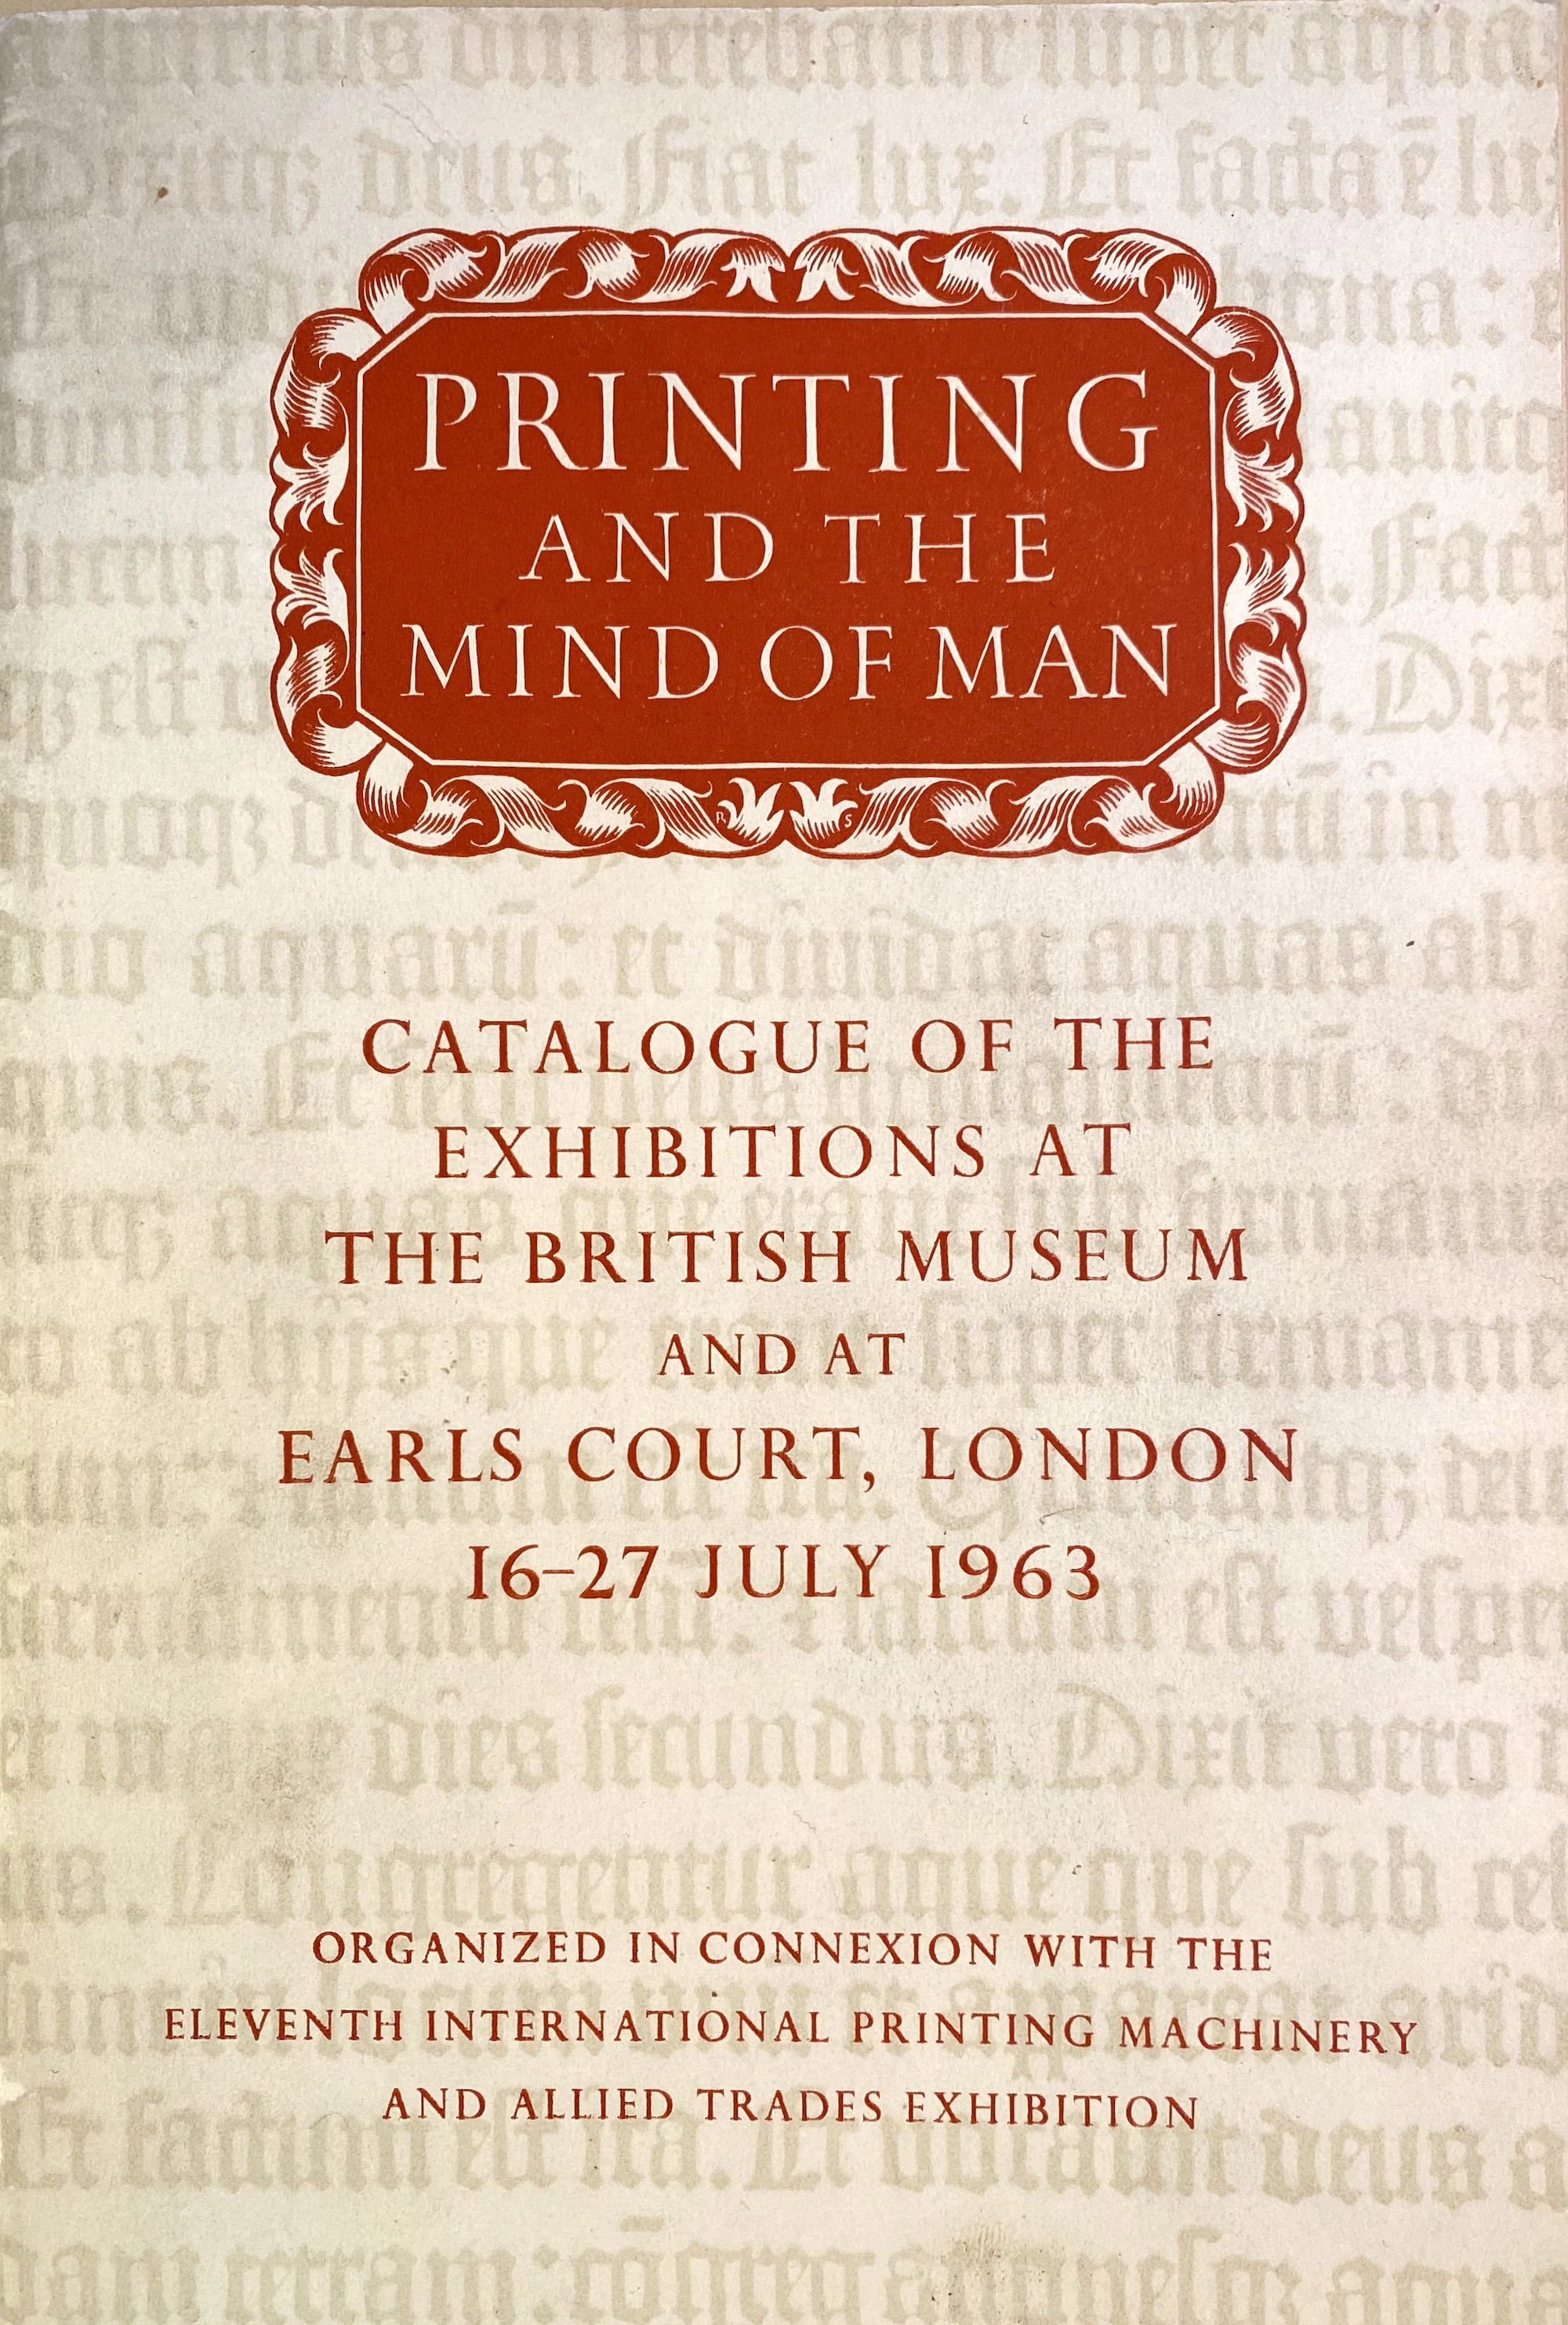 Upper cover of the 1963 catalogue printed for the exhibition.